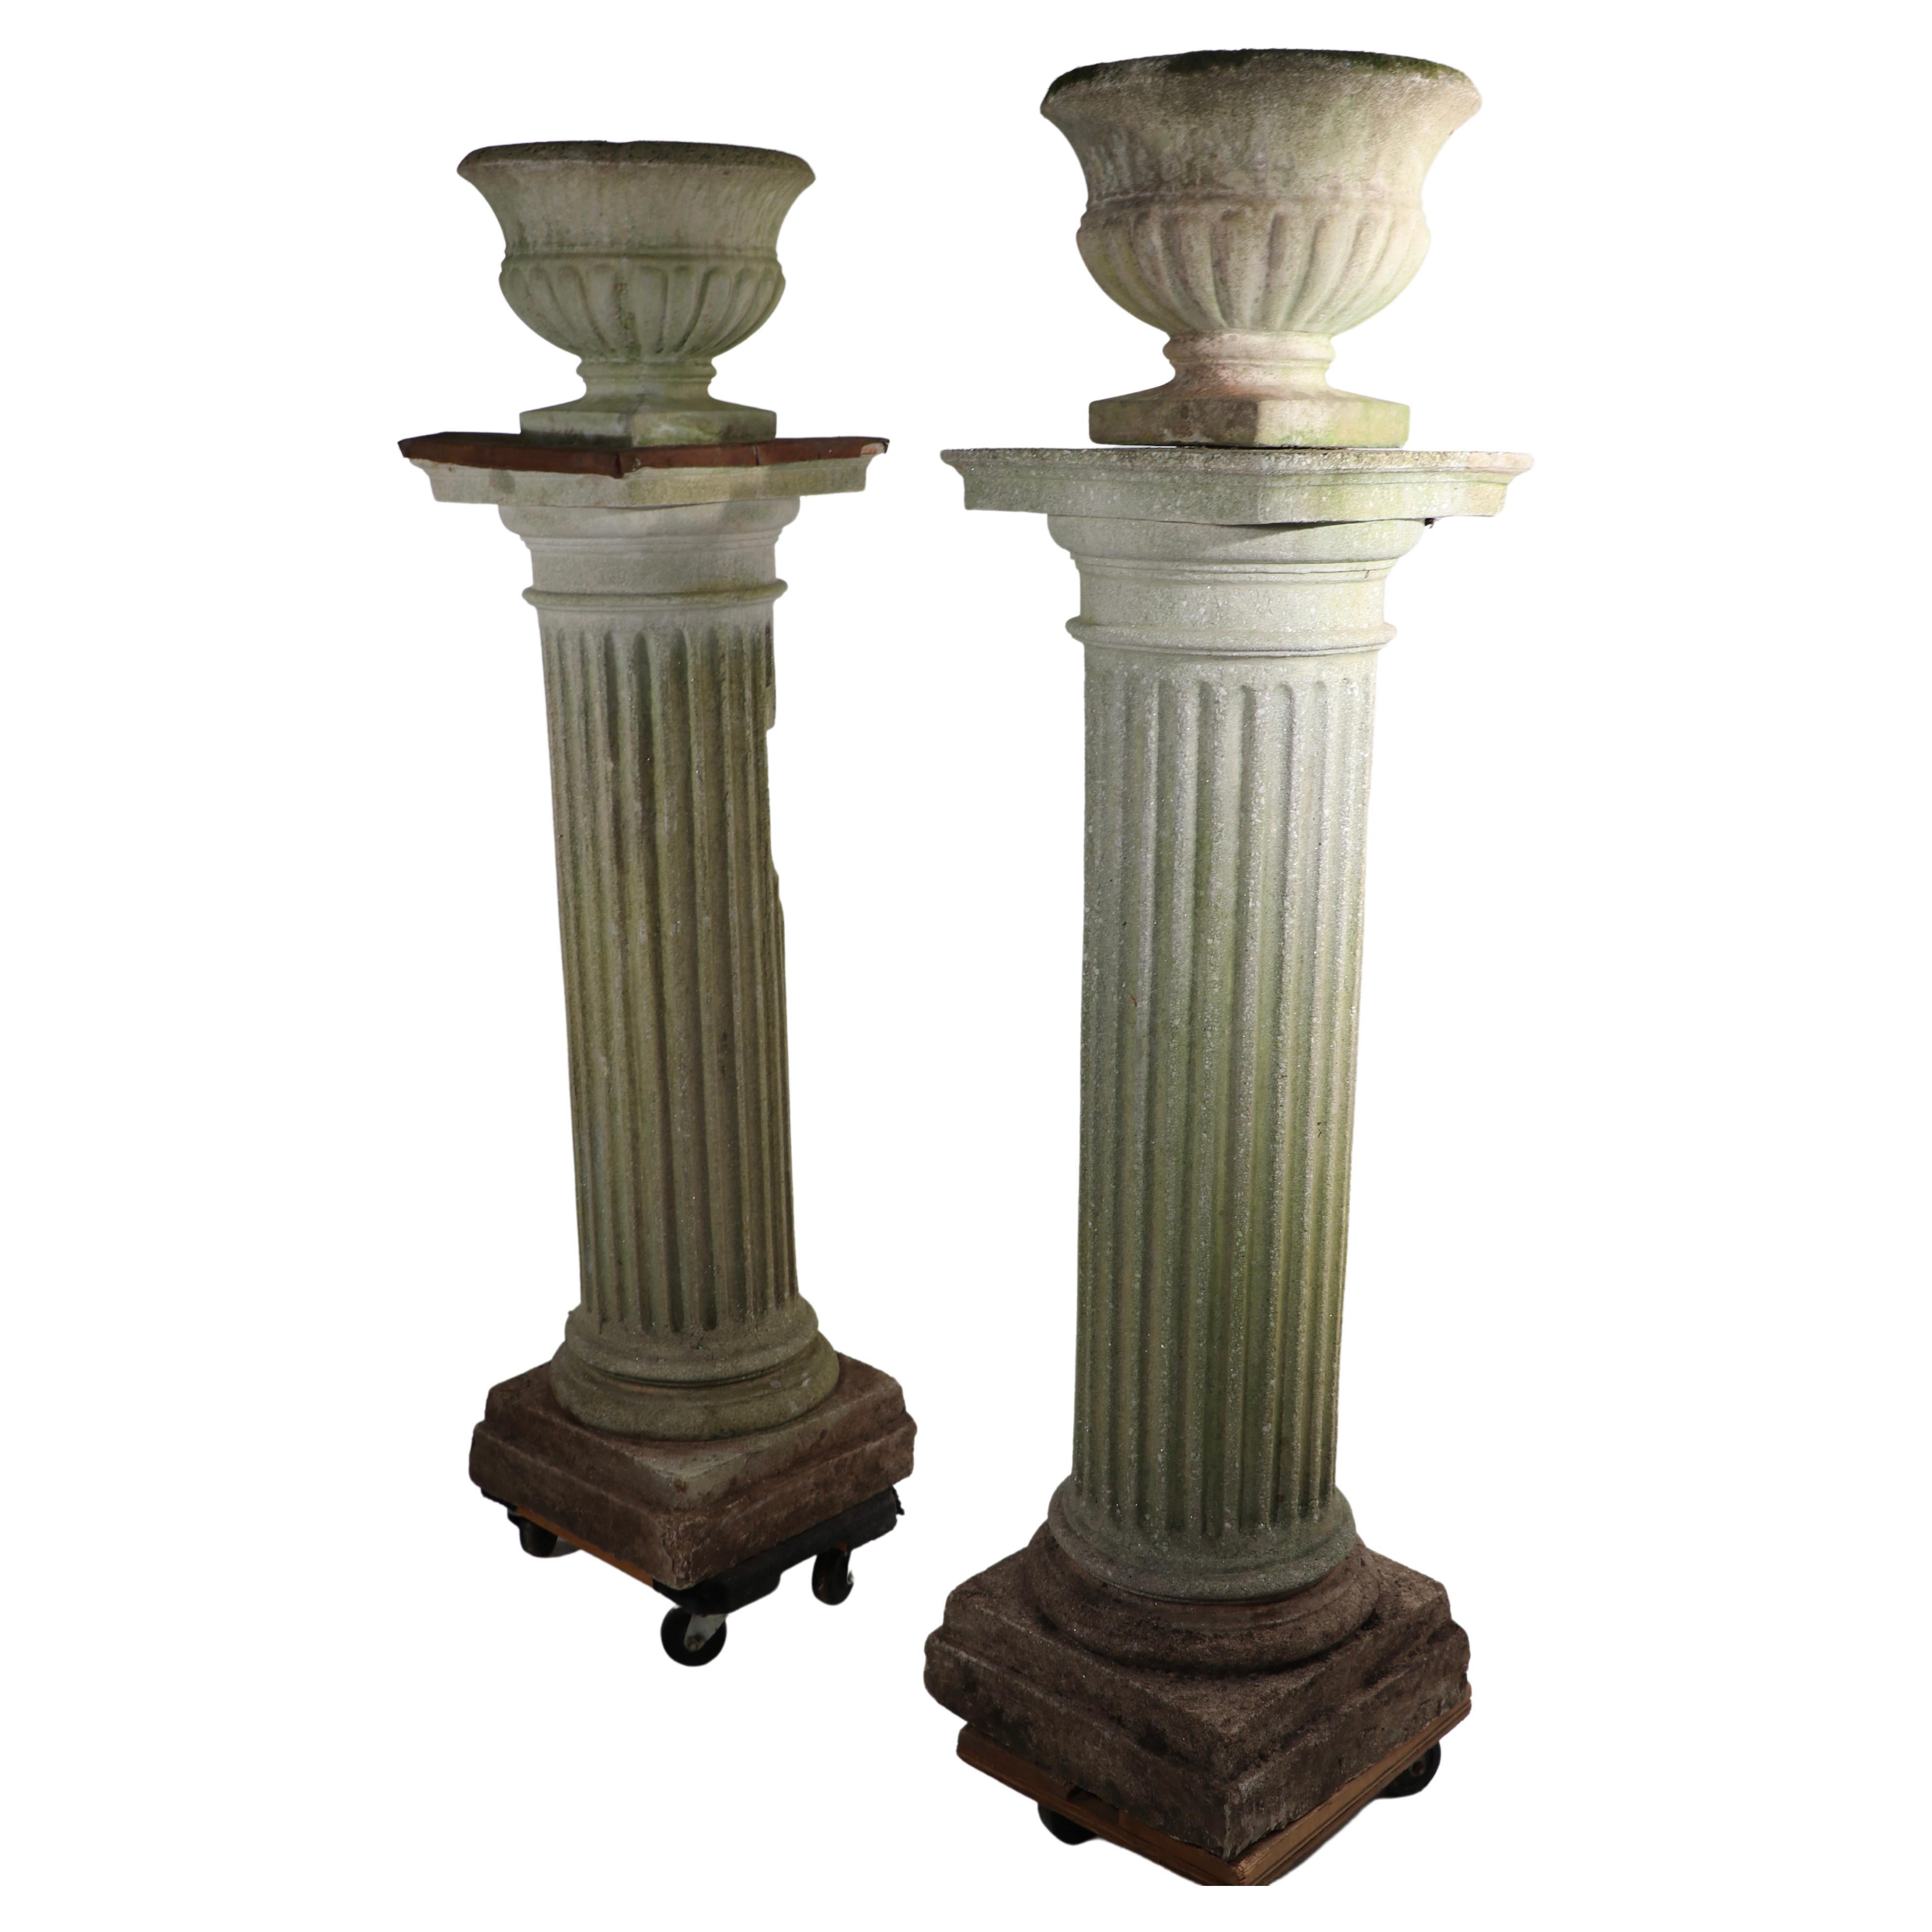 Impressive pair of cast stone Roman Doric style columns each having a cast stone Campania from jardiniere, planter mount. The planters are removable if you have other design schemes calling only for columns. Oddly, one top has a vertical post, which